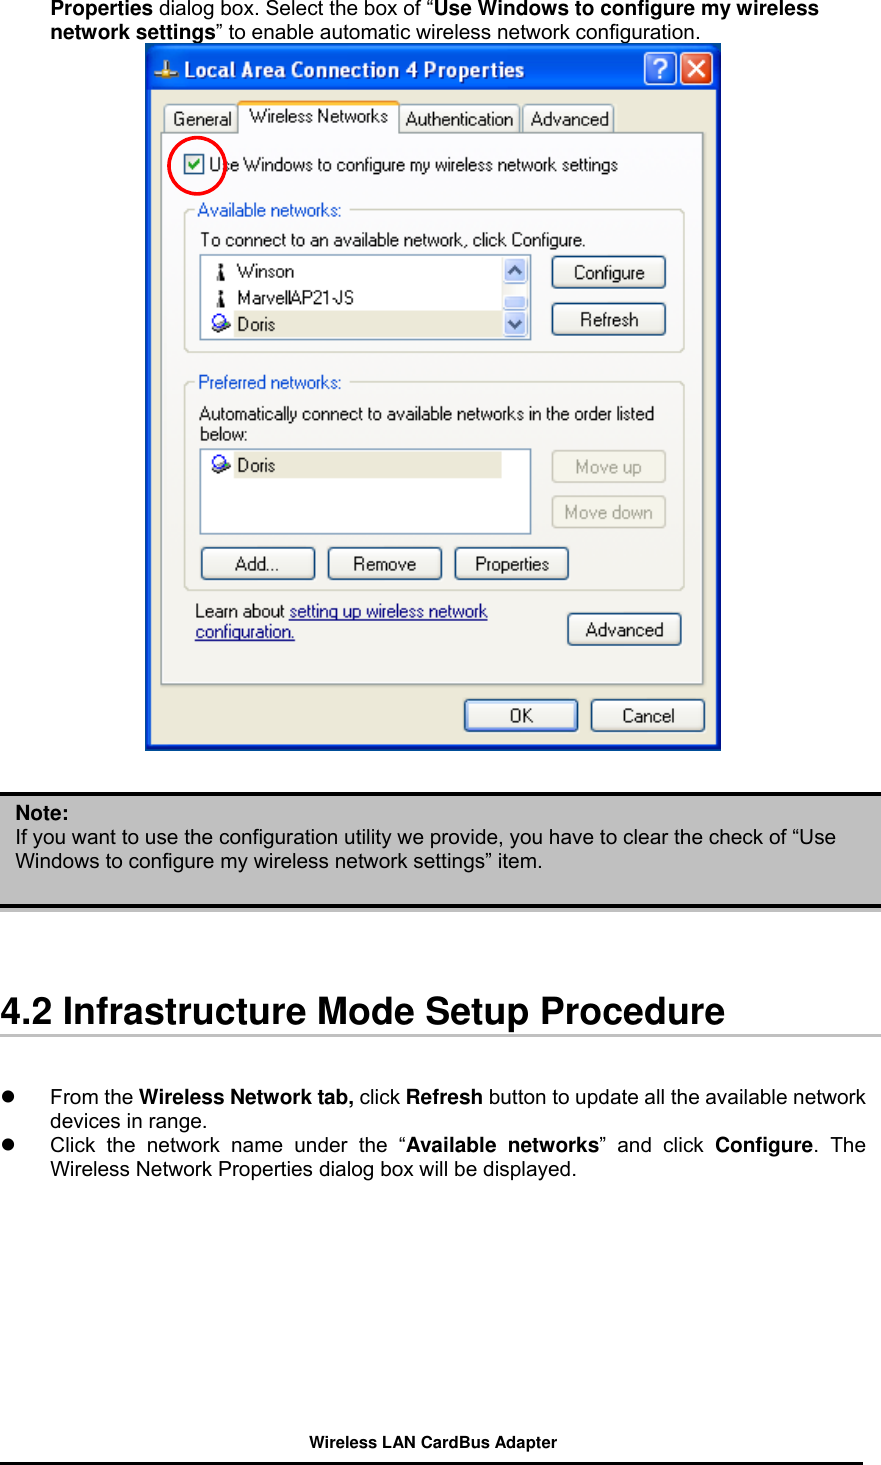 Properties dialog box. Select the box of “Use Windows to configure my wireless network settings” to enable automatic wireless network configuration.            Note: If you want to use the configuration utility we provide, you have to clear the check of “Use Windows to configure my wireless network settings” item.   4.2 Infrastructure Mode Setup Procedure     From the Wireless Network tab, click Refresh button to update all the available network devices in range.     Click the network name under the “Available networks” and click Configure. The Wireless Network Properties dialog box will be displayed.  Wireless LAN CardBus Adapter 